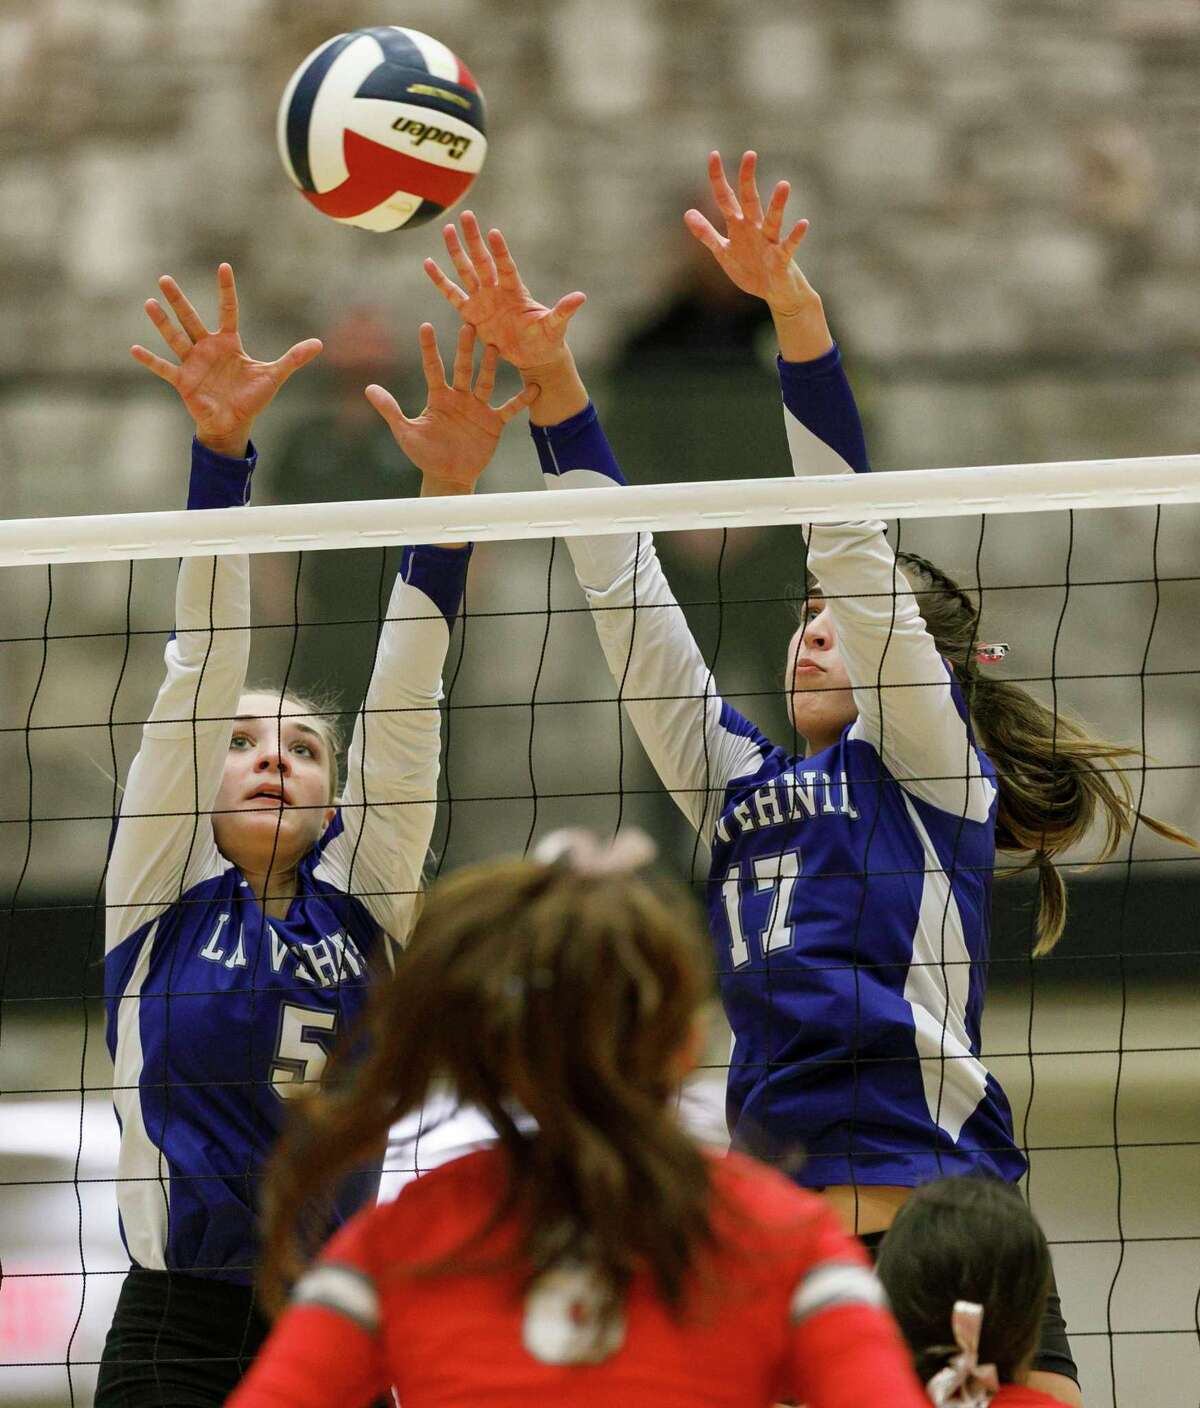 La Vernia's Mikayla Lindsey (5) and Madison Whatley (17) attempt a block against the Bellville Brahmas in the second set of the Region IV-4A volleyball championship at Littleton Gym in San Antonio, Texas, Saturday, Nov. 12, 2022. Belleville secured its third straight Region IV-4A volleyball championship with a 21-25, 26-24, 25-14, 21-25, 15-11 victory against La Vernia.